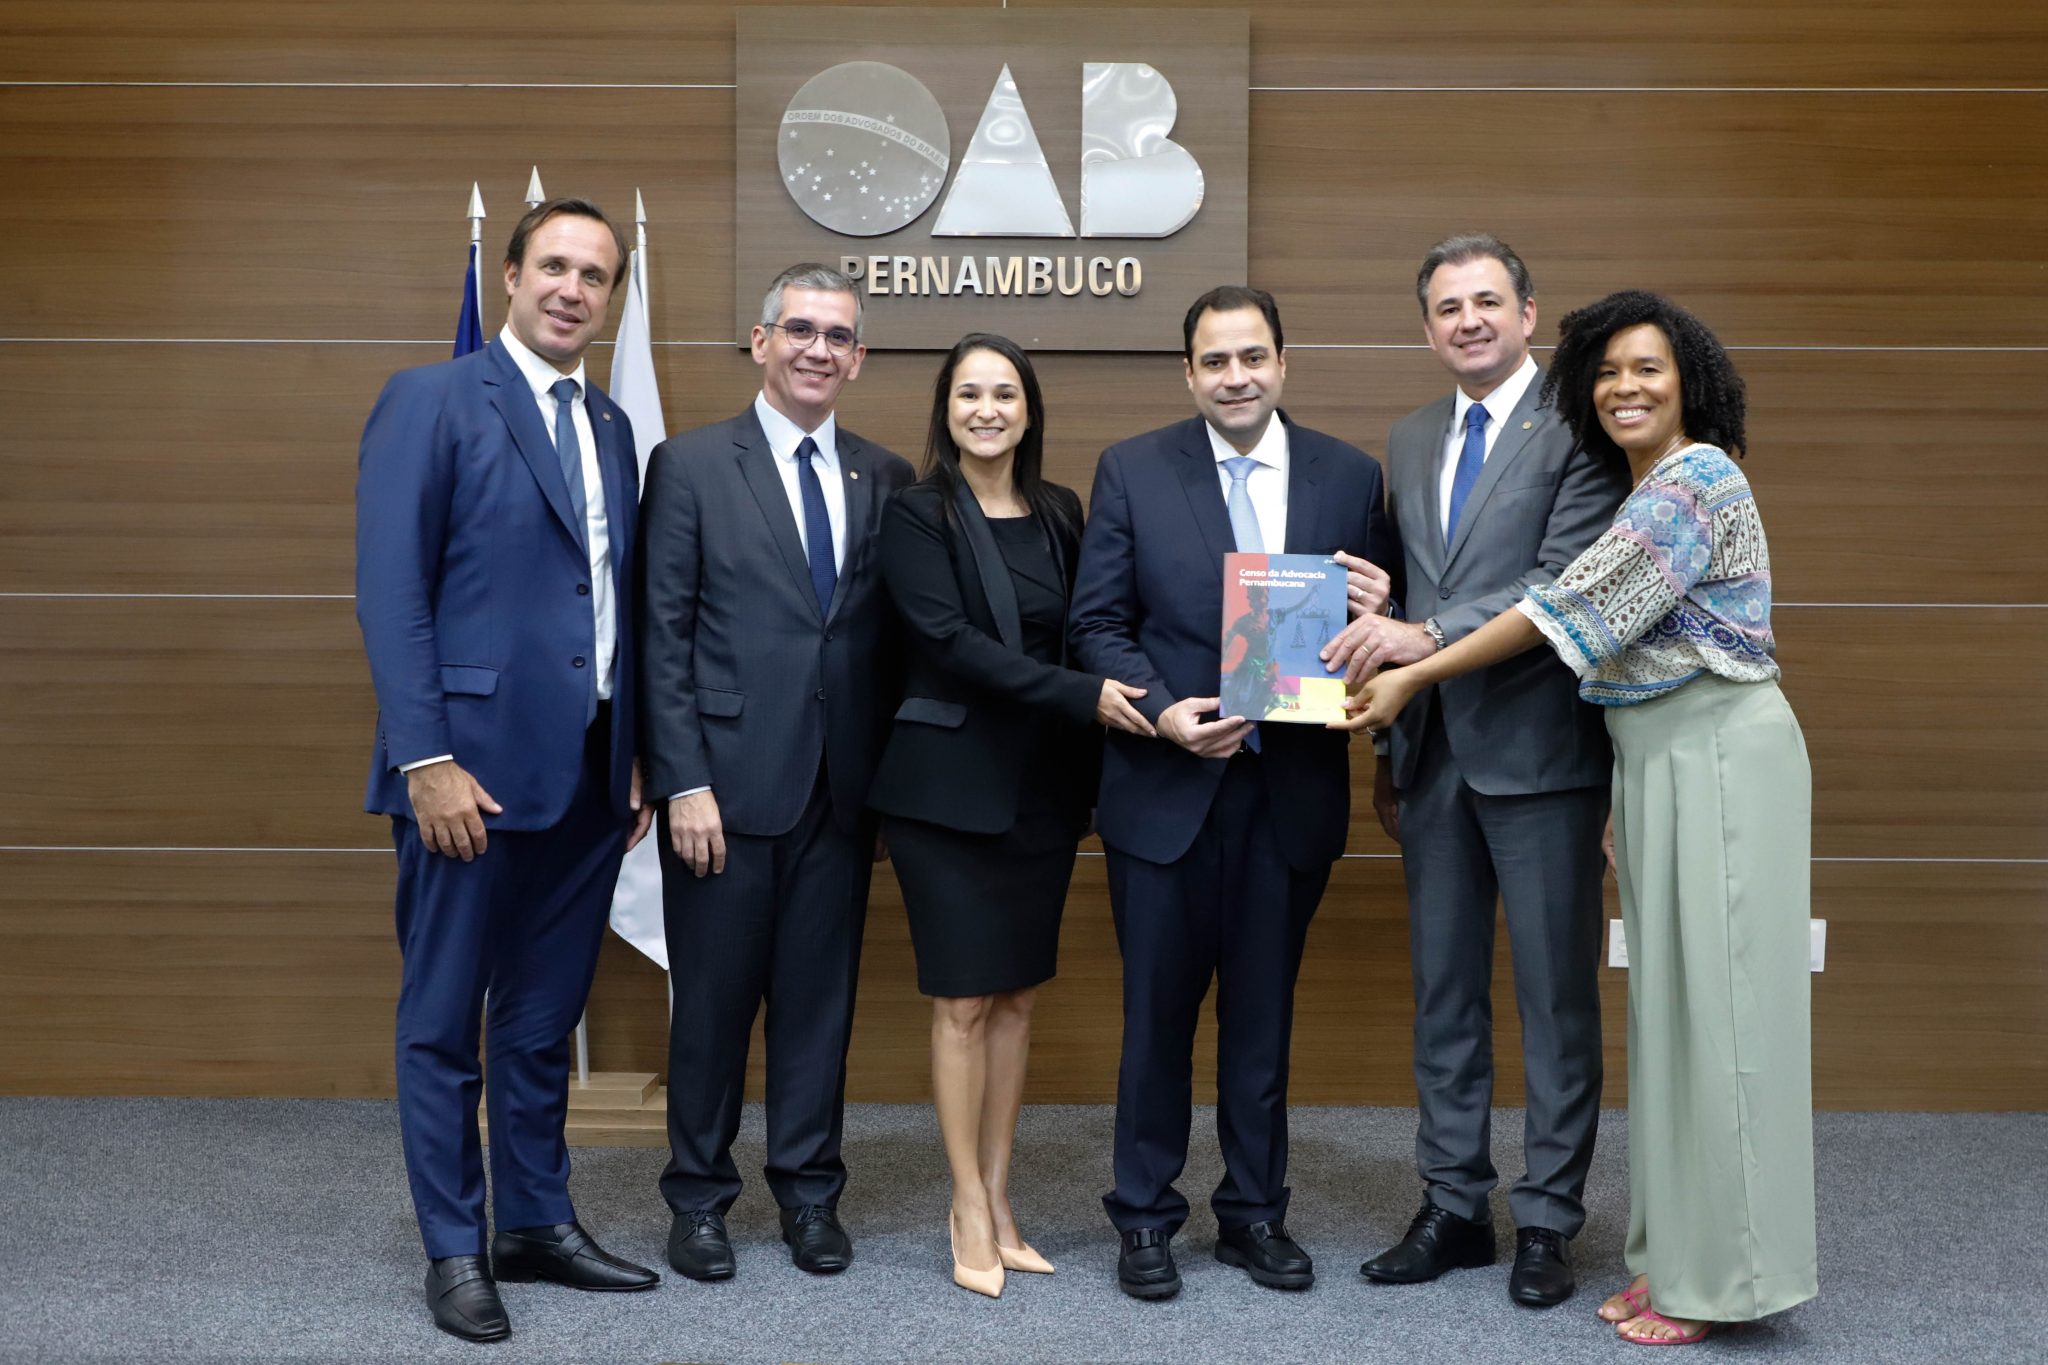 Investiture of the new board of OAB Pernambuco honors the entity’s 90th anniversary and launches unpublished census in the country